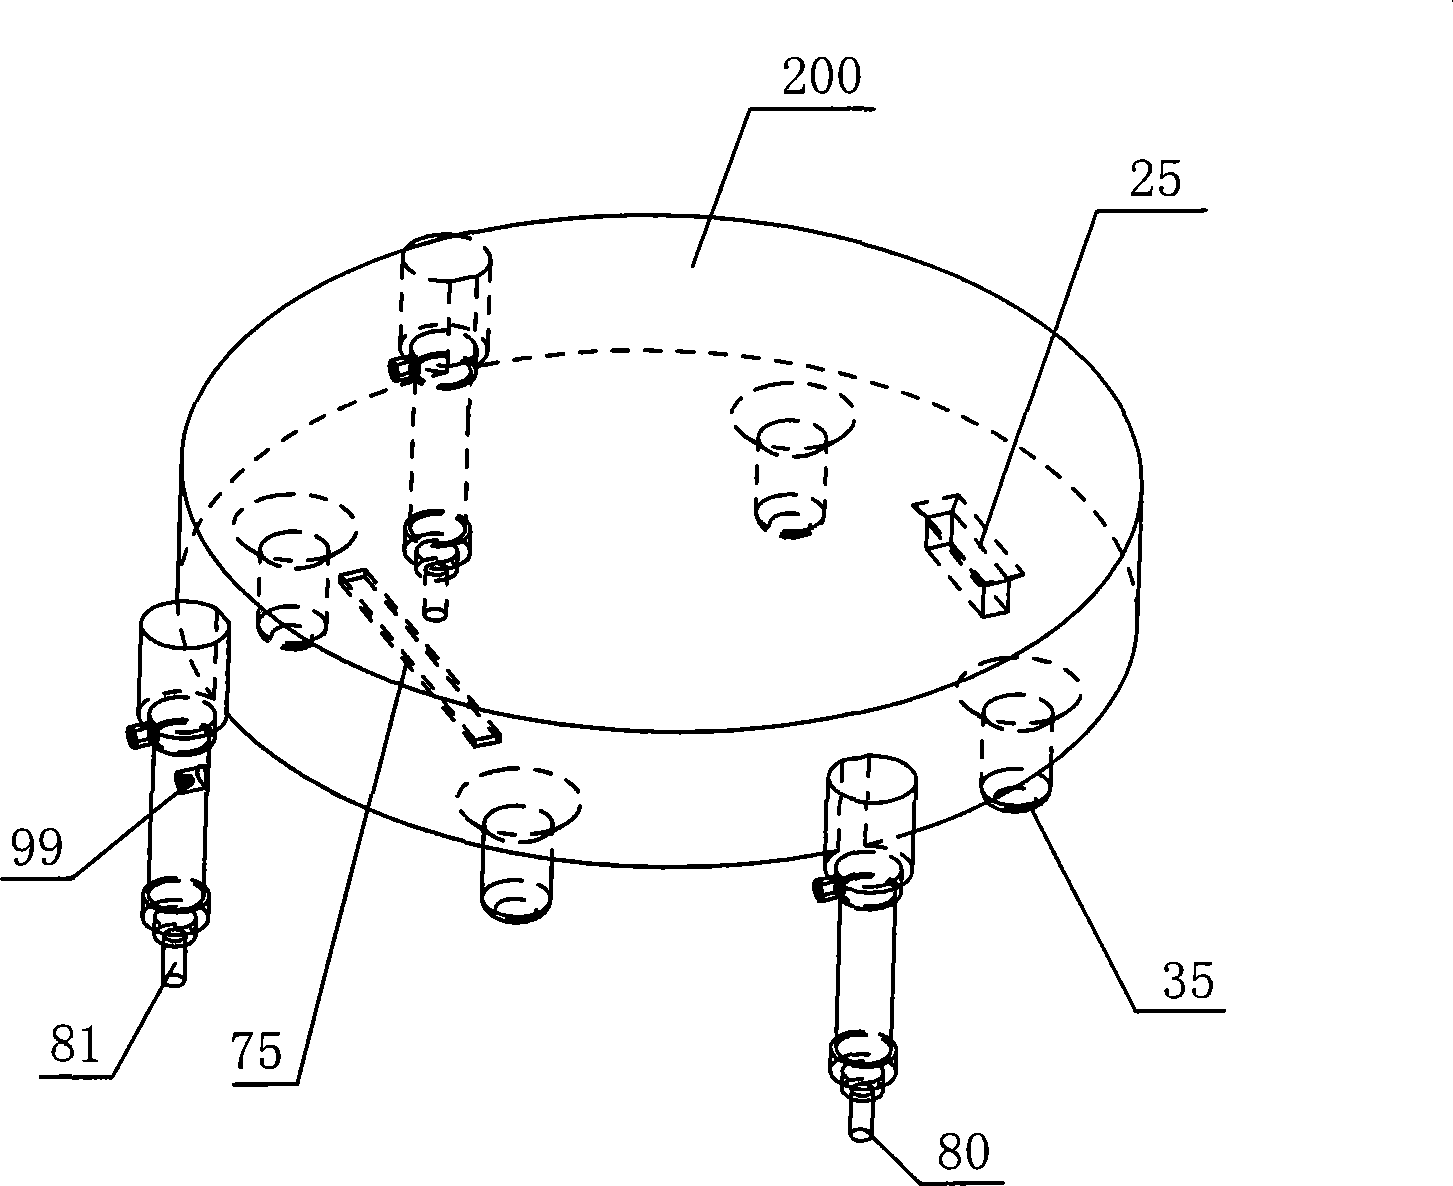 Multifunctional robot system and control method for robot body to search module part